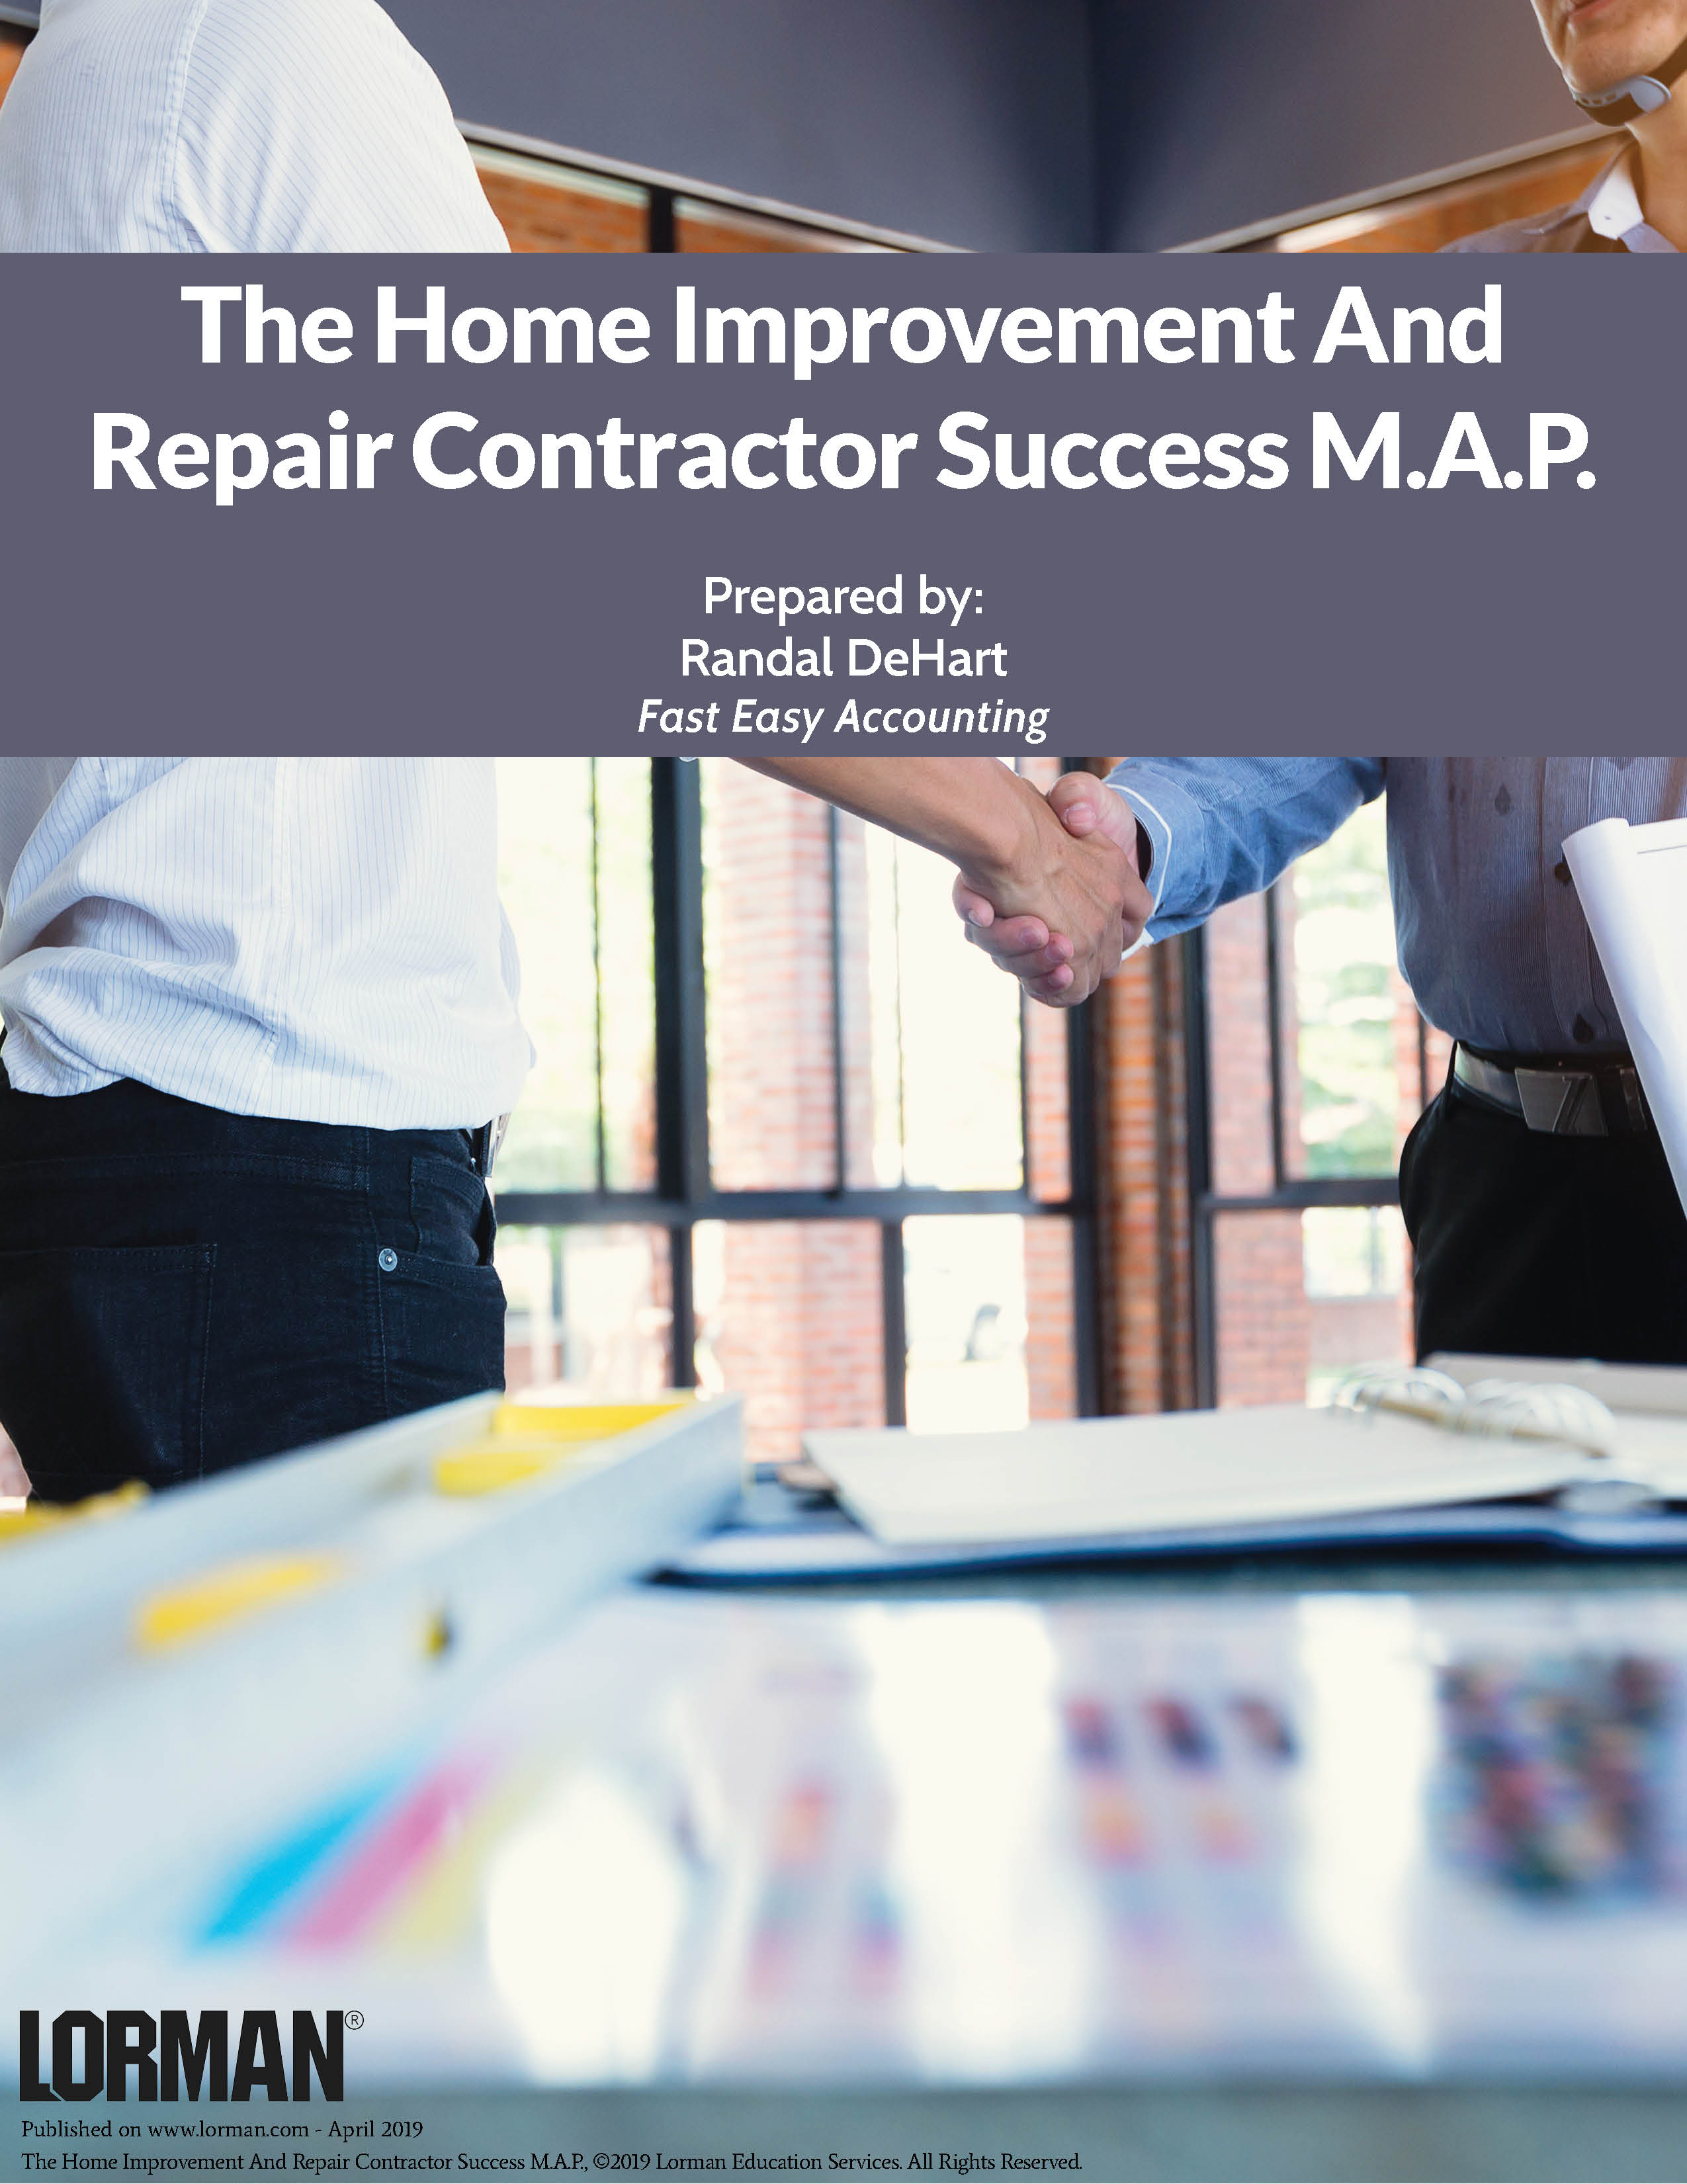 The Home Improvement And Repair Contractor Success M.A.P.